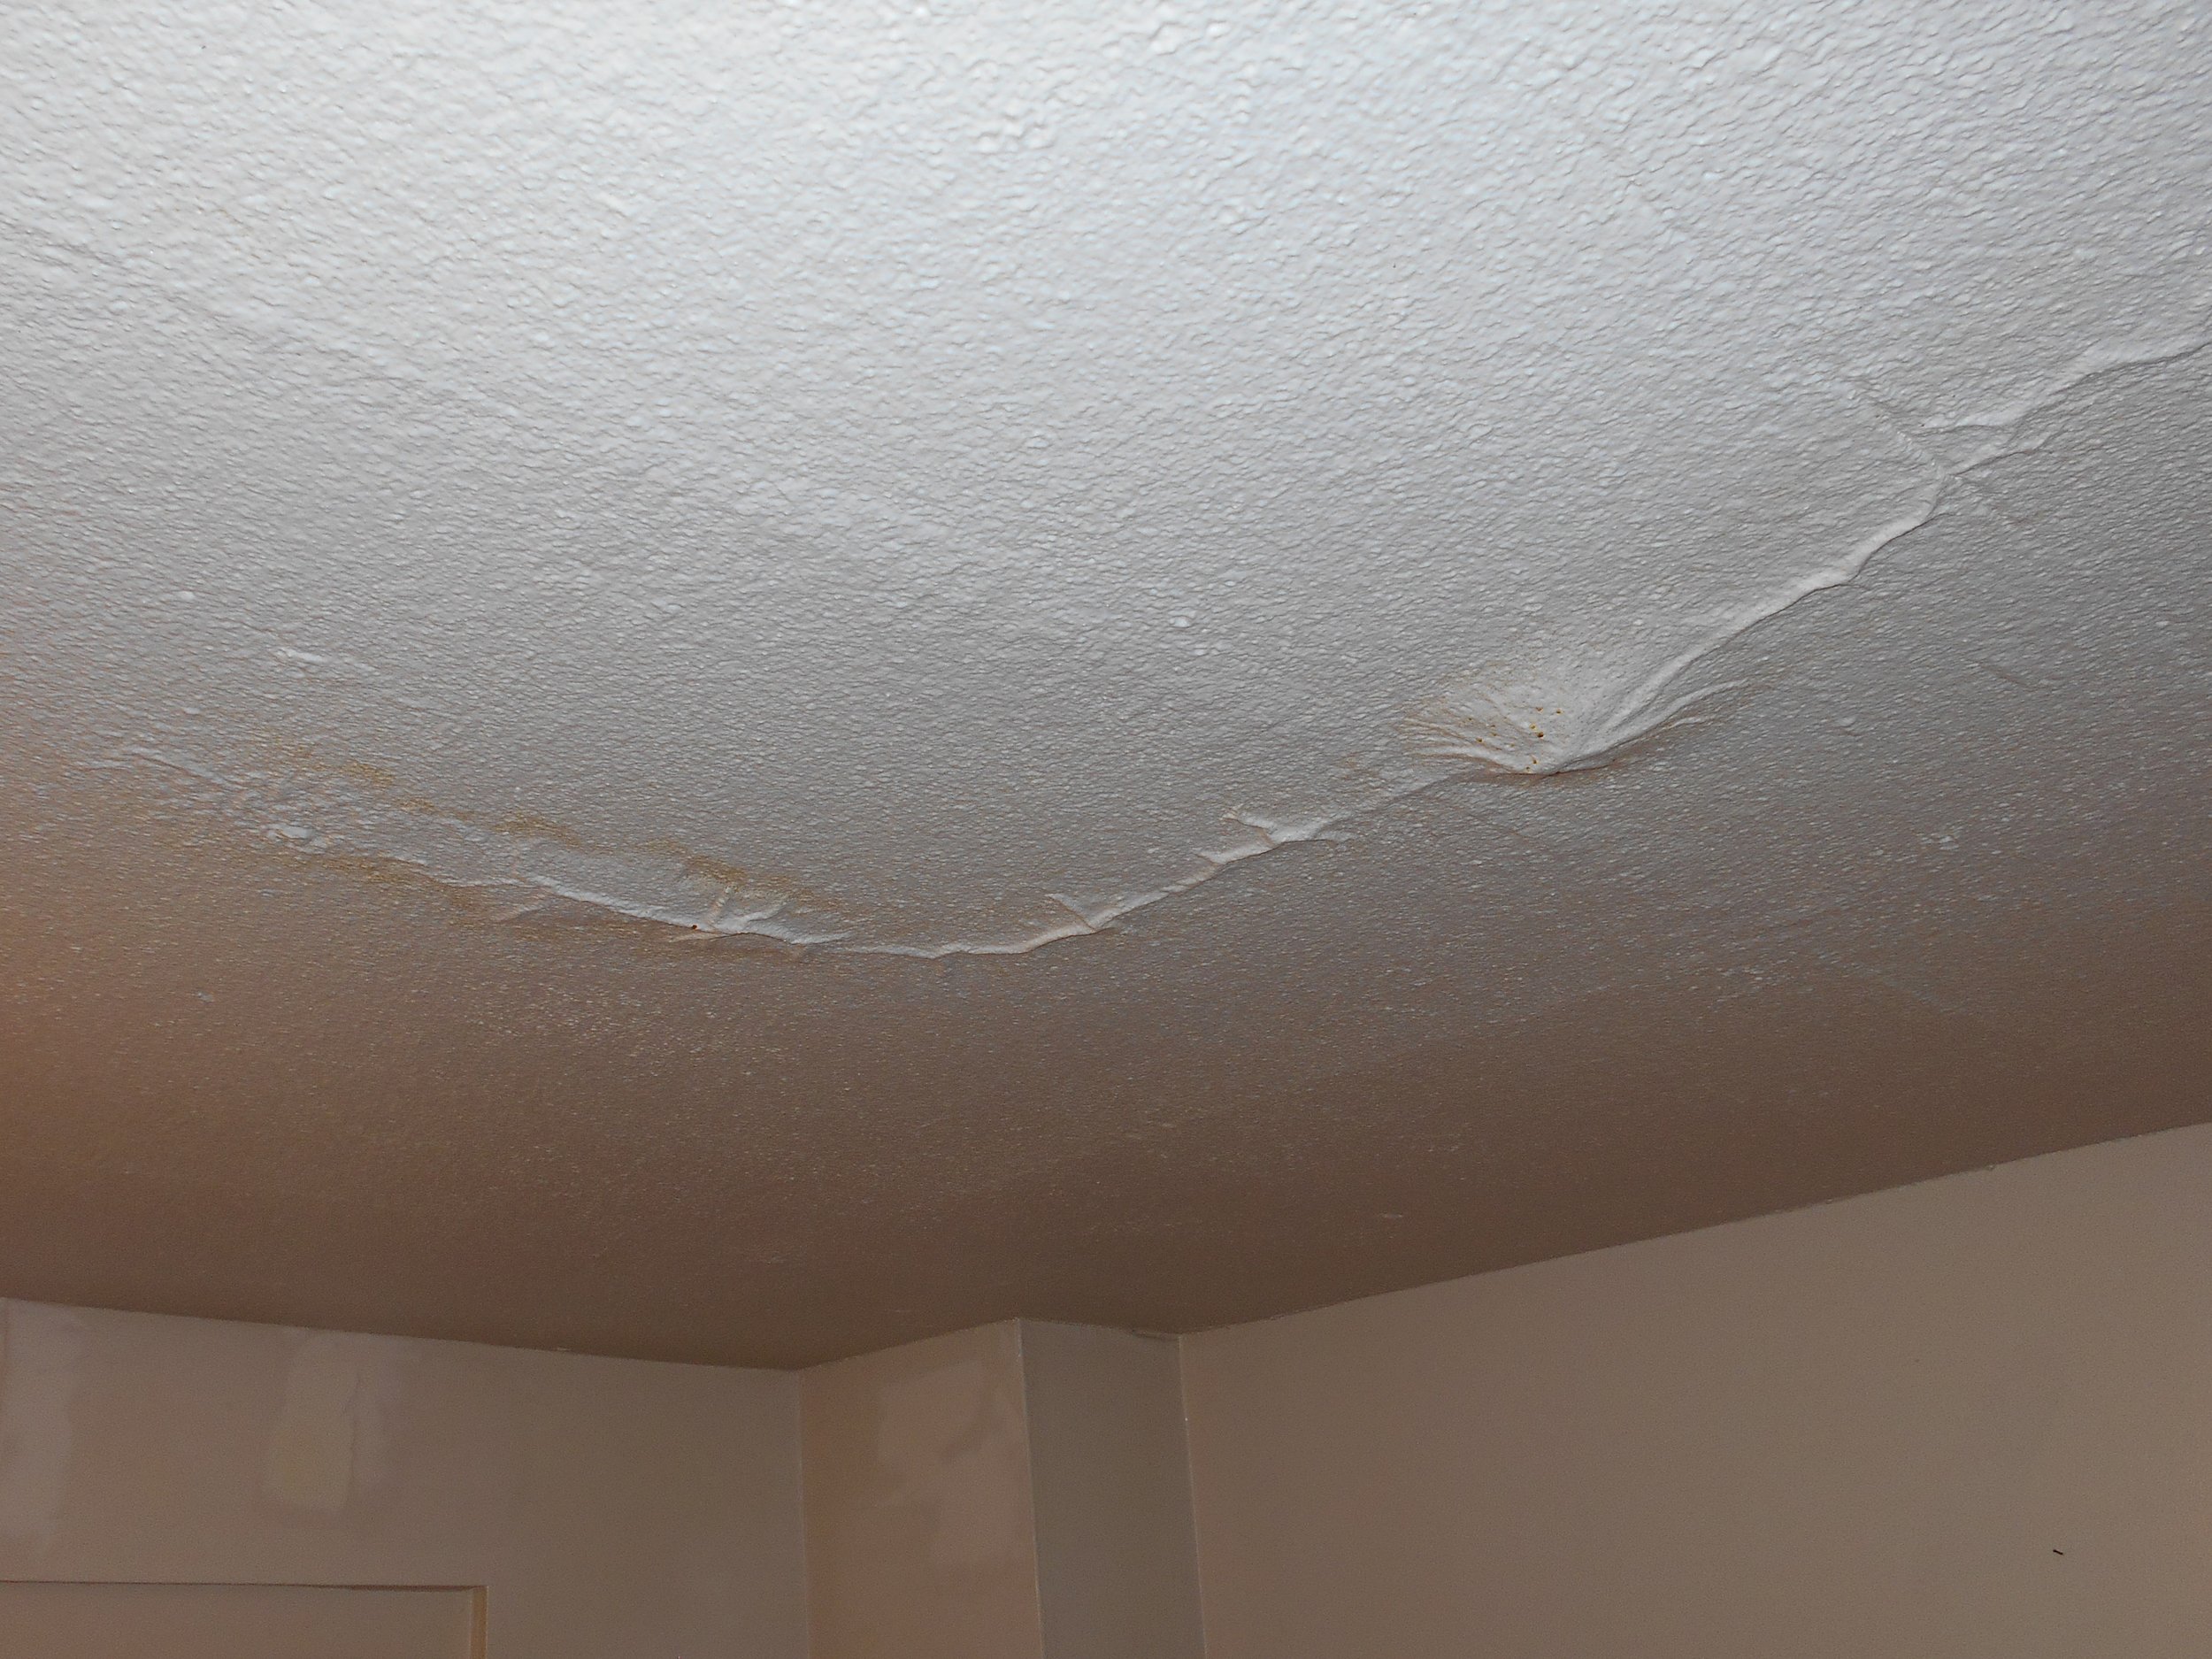 parkview tower mold and roof leaks 5.jpg